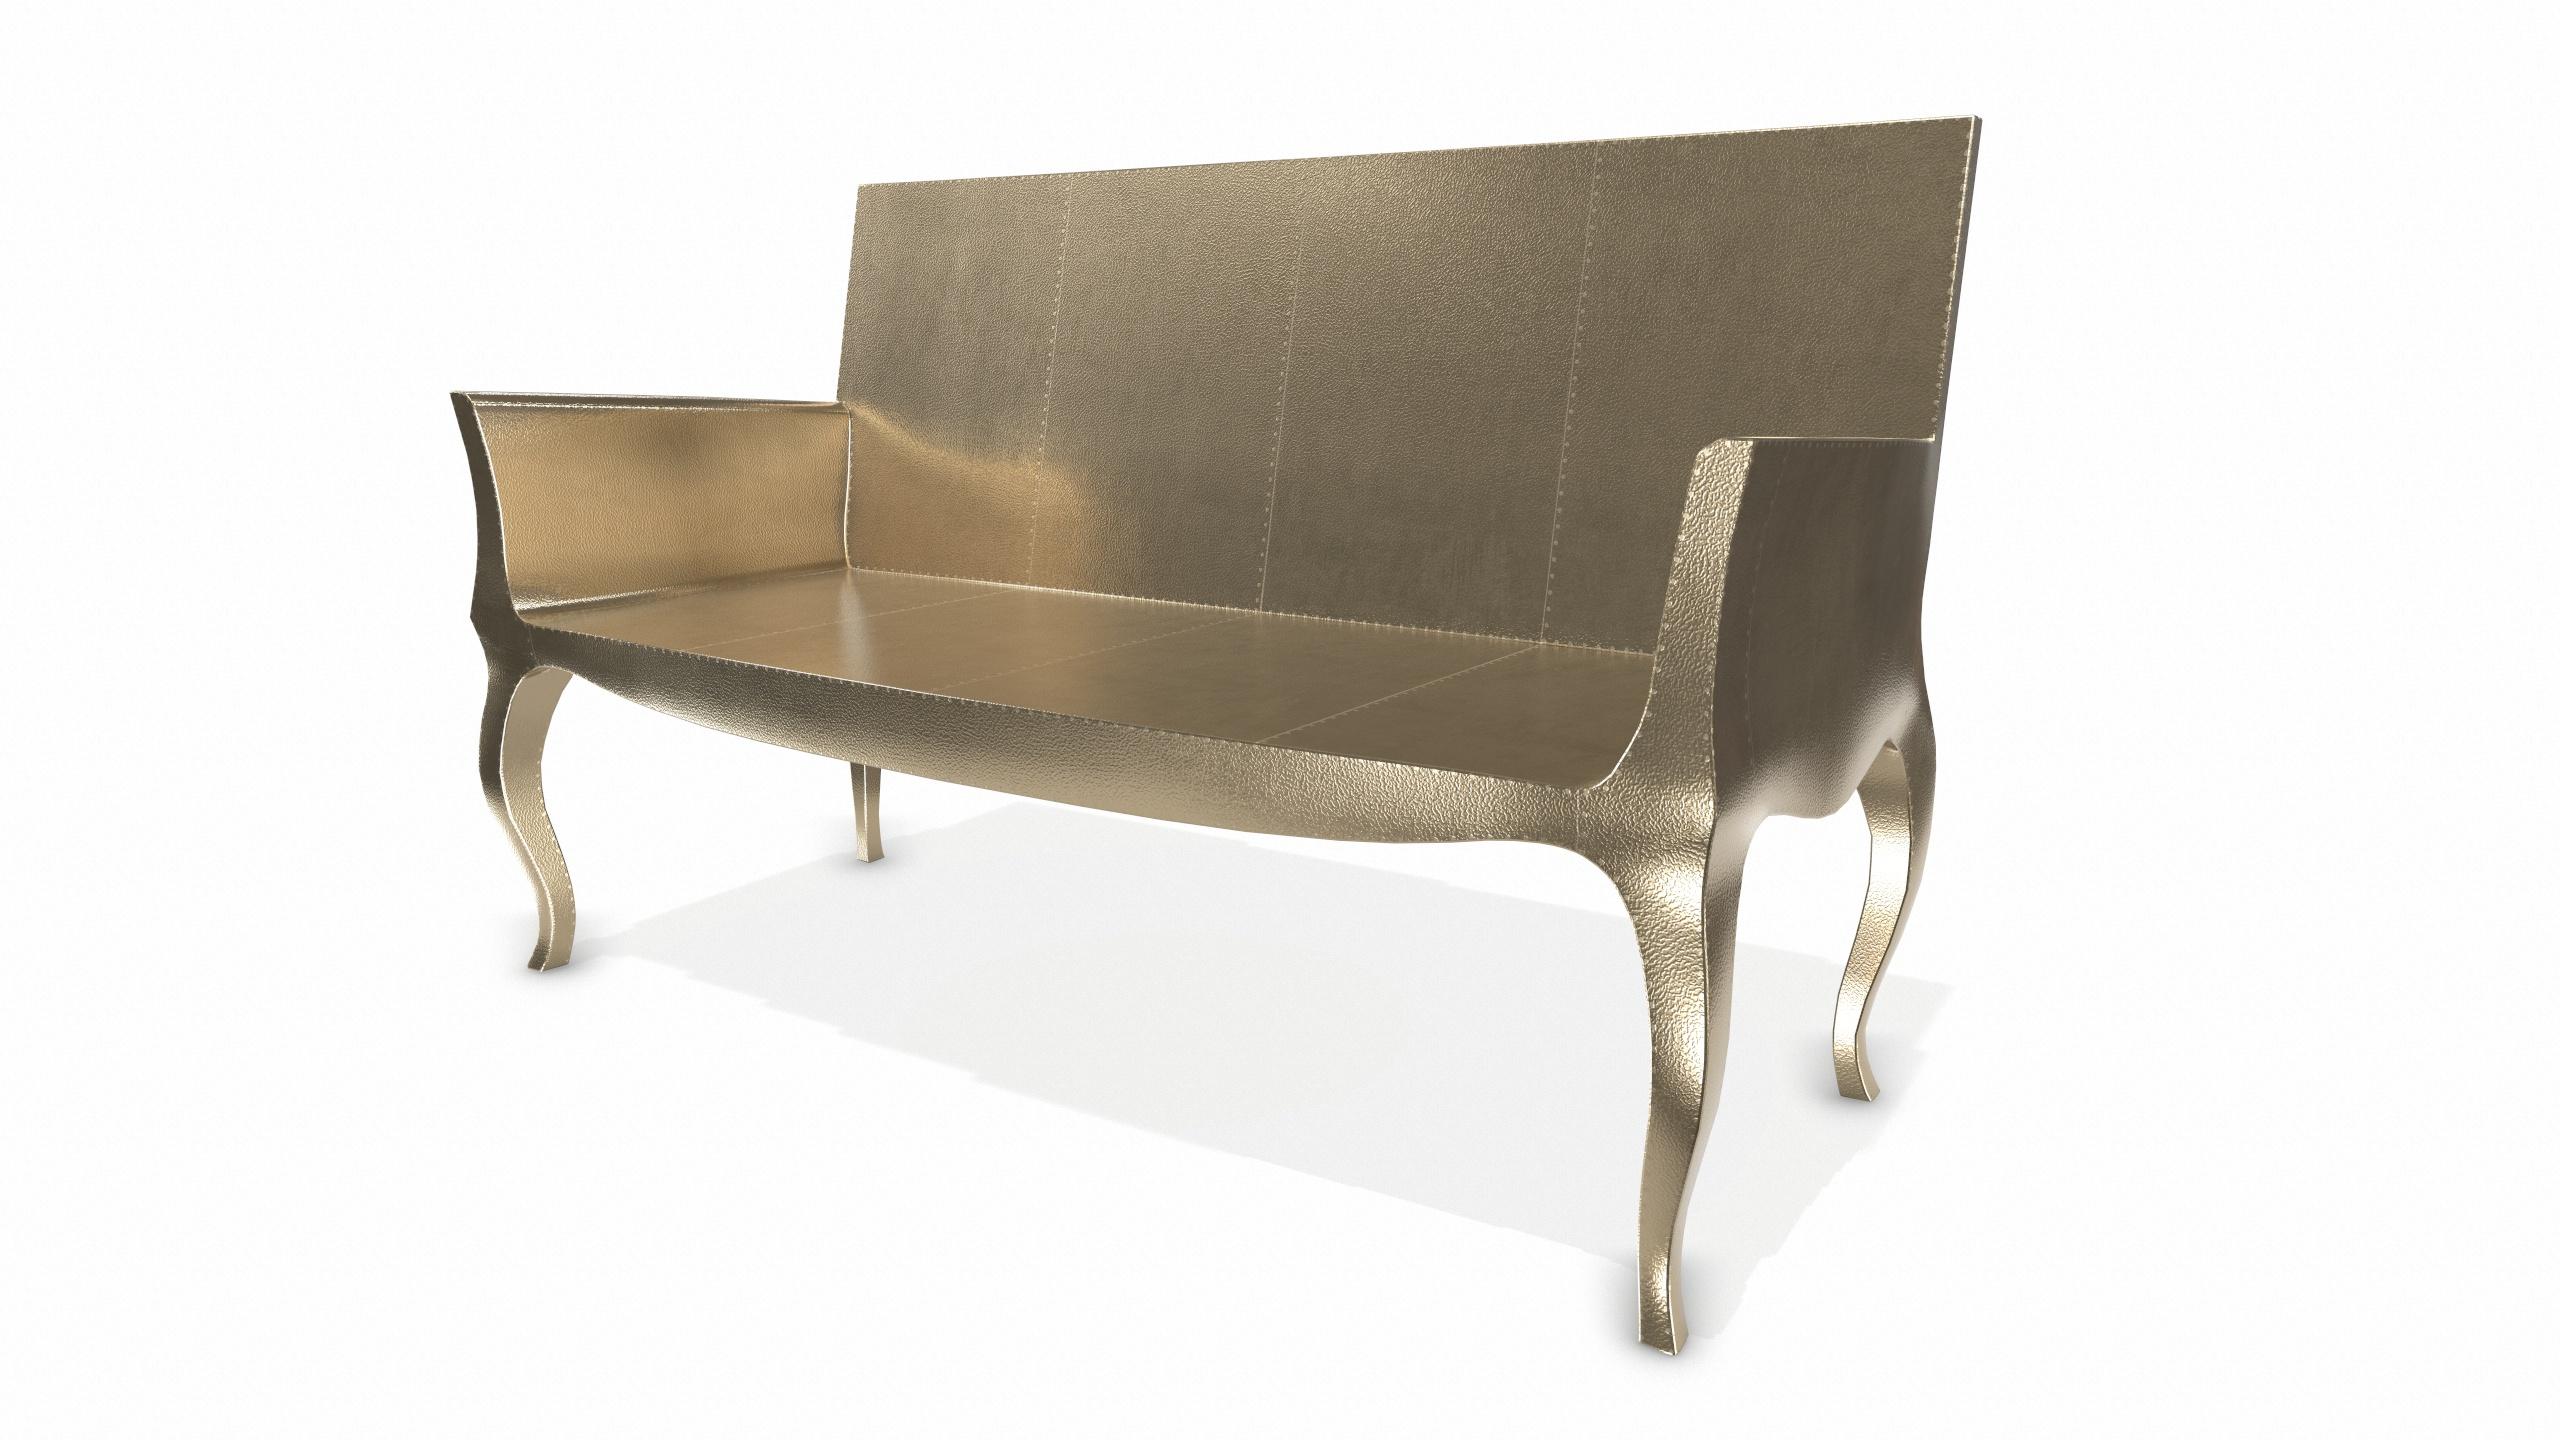 Wood Louise Settee Art Deco Lounge Chairs in Fine Hammered Brass by Paul Mathieu For Sale